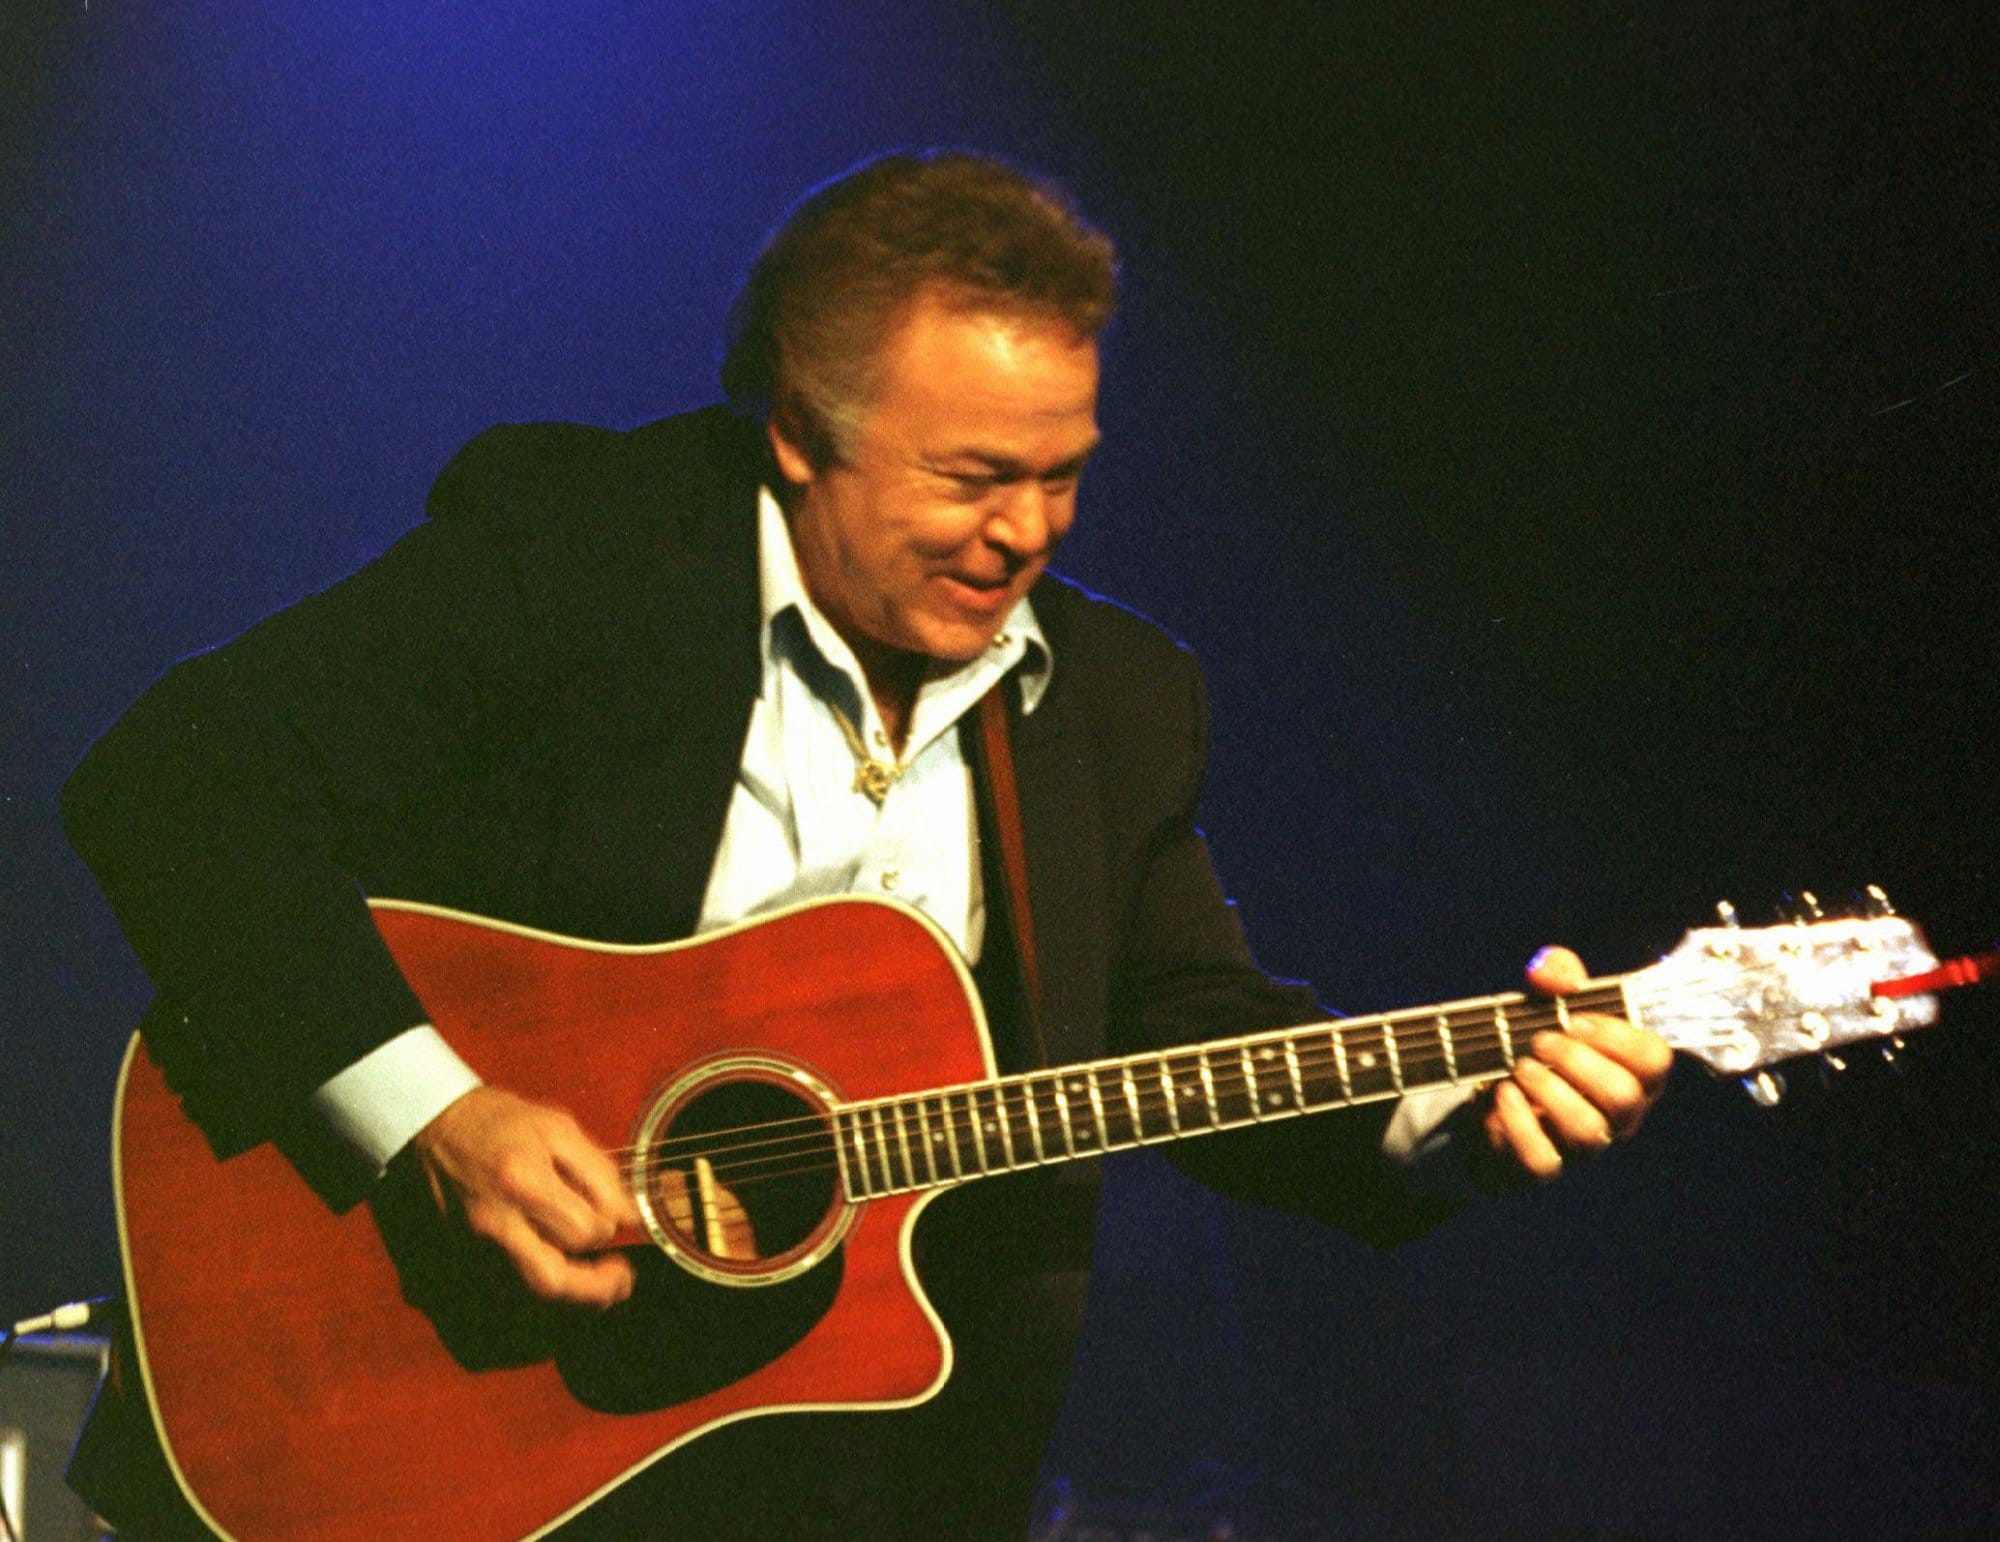 Roy Clark picks his way through a performance at his theater in Branson, Mo., Oct. 14, 1996. Clark was the first big name to have a theater in Branson and lead the way for others to come. He gives his last performance in Branson next month.  (AP Photo/John S. Stewart)